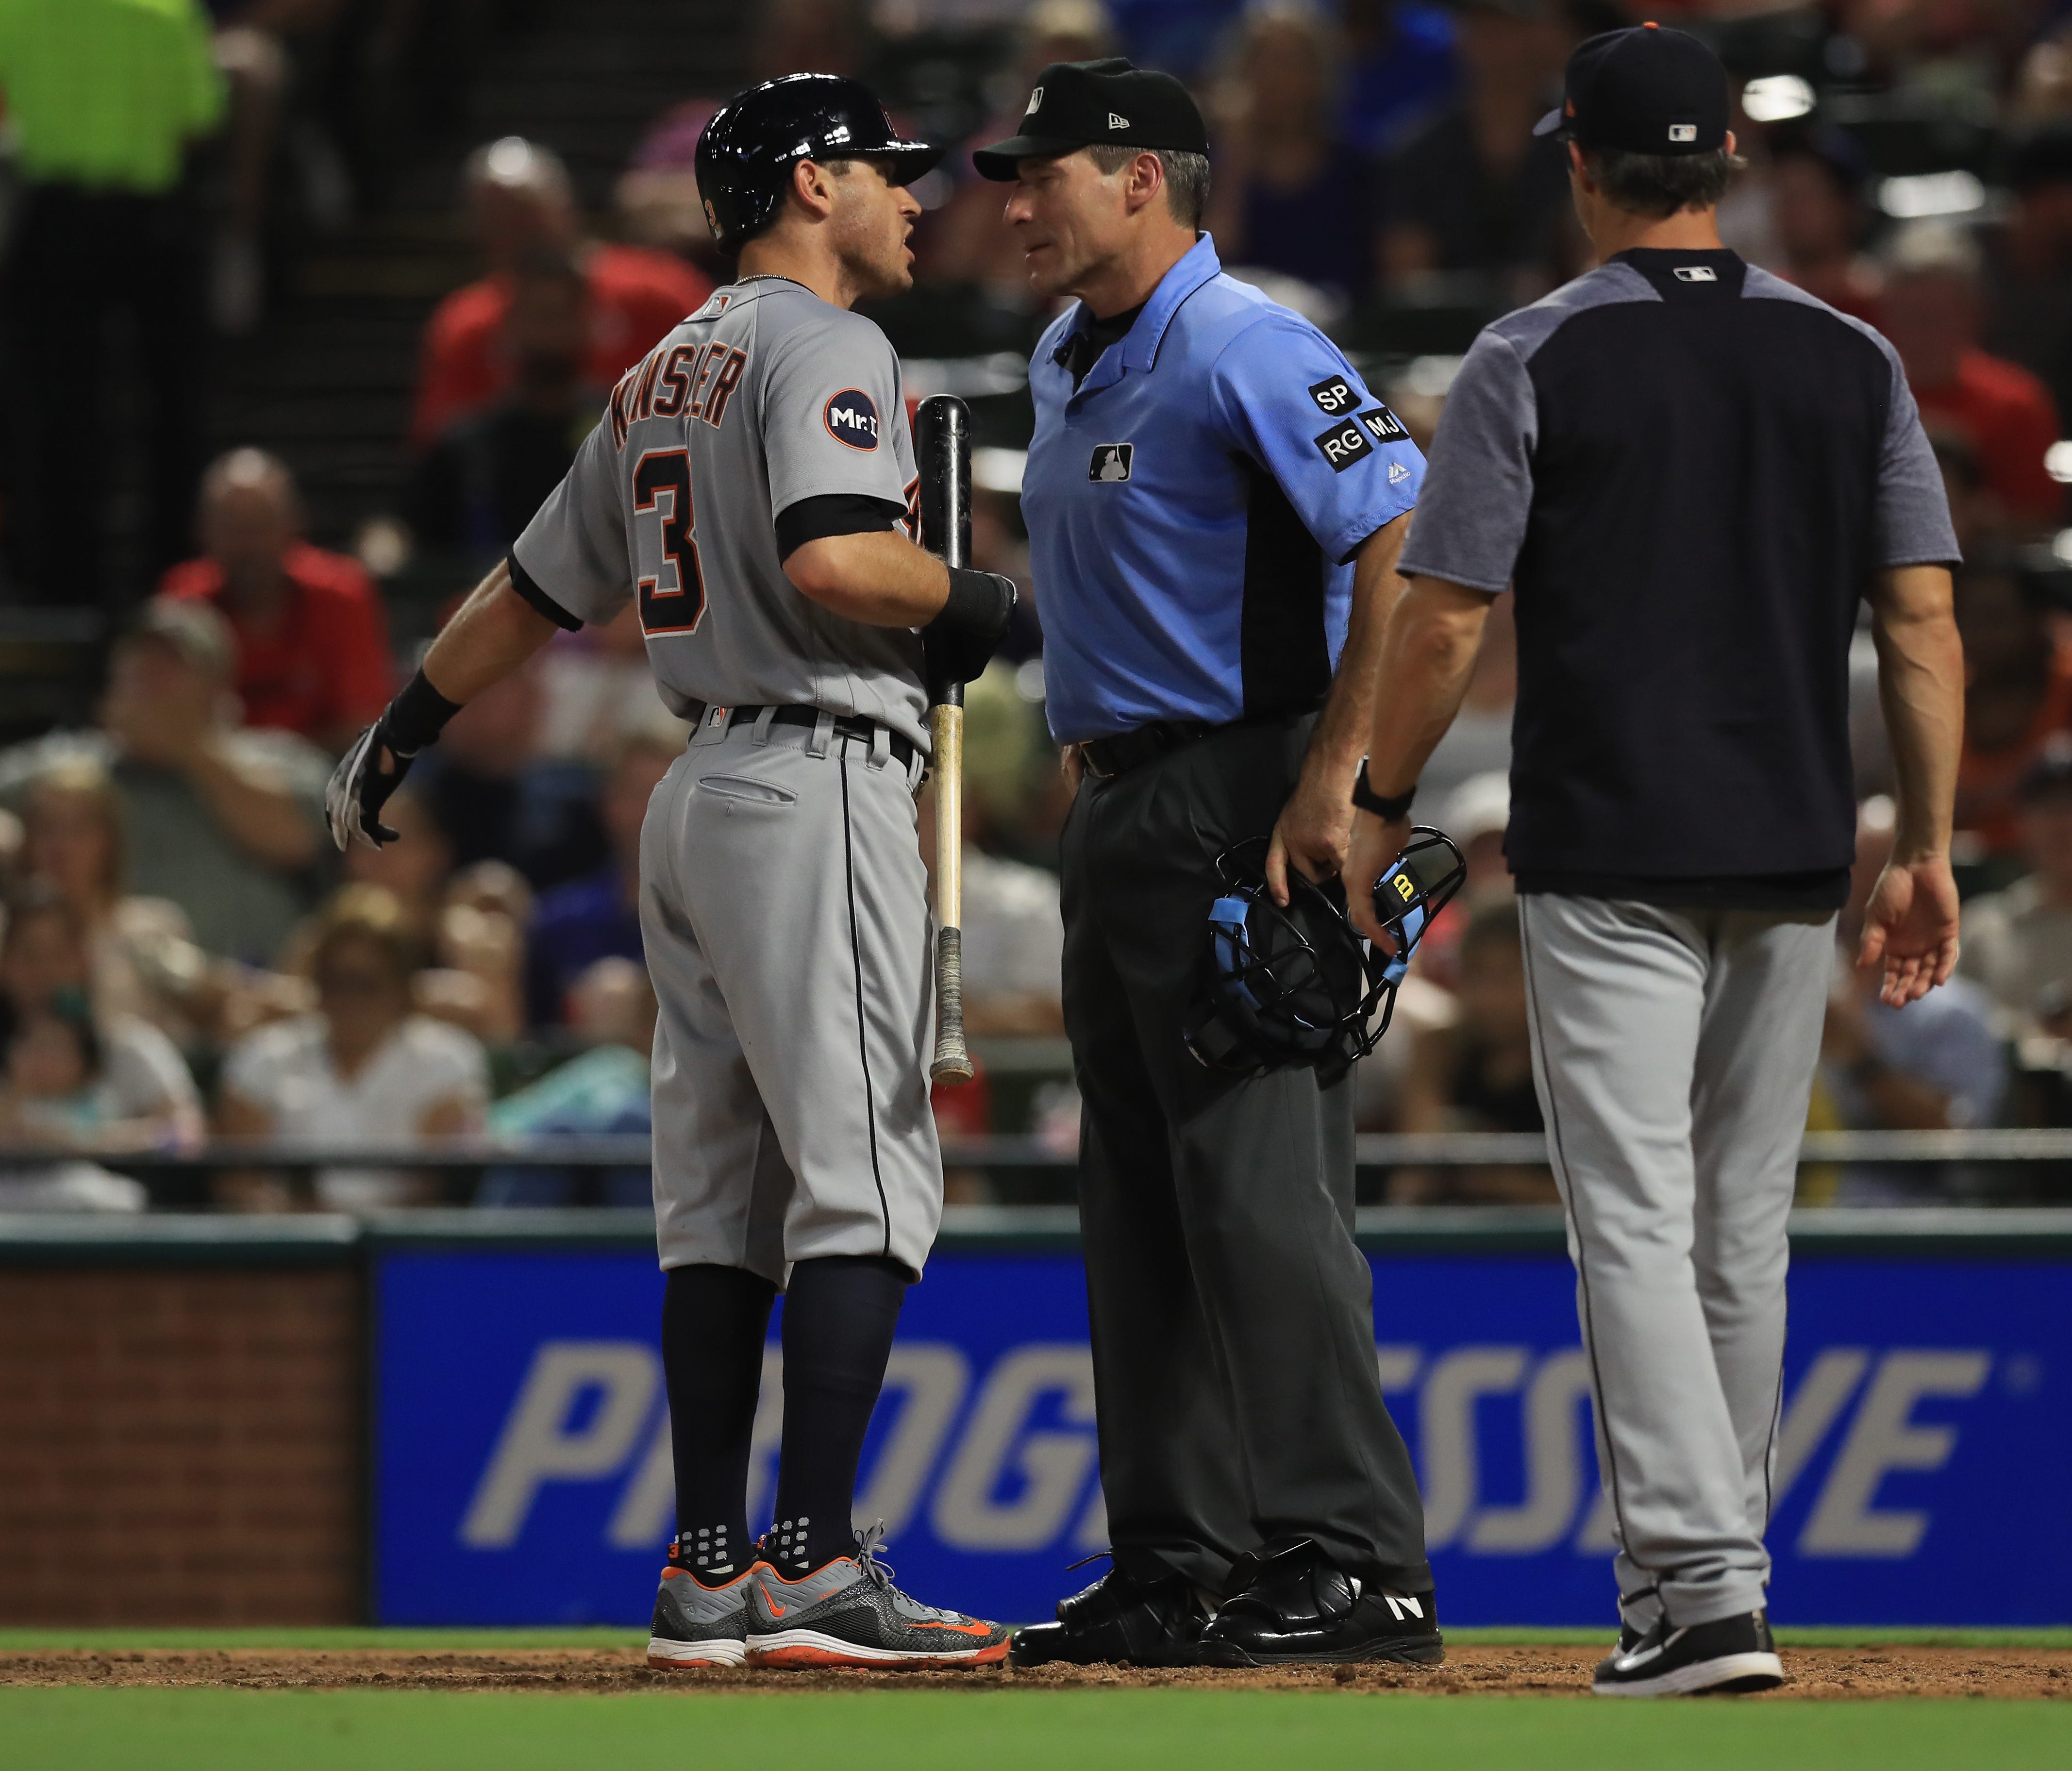 Tigers second baseman Ian Kinsler after being ejected by home plate umpire Angel Hernandez during the Tigers' 6-2 loss to the Rangers on Monday, Aug. 14, 2017, in Arlington, Texas.